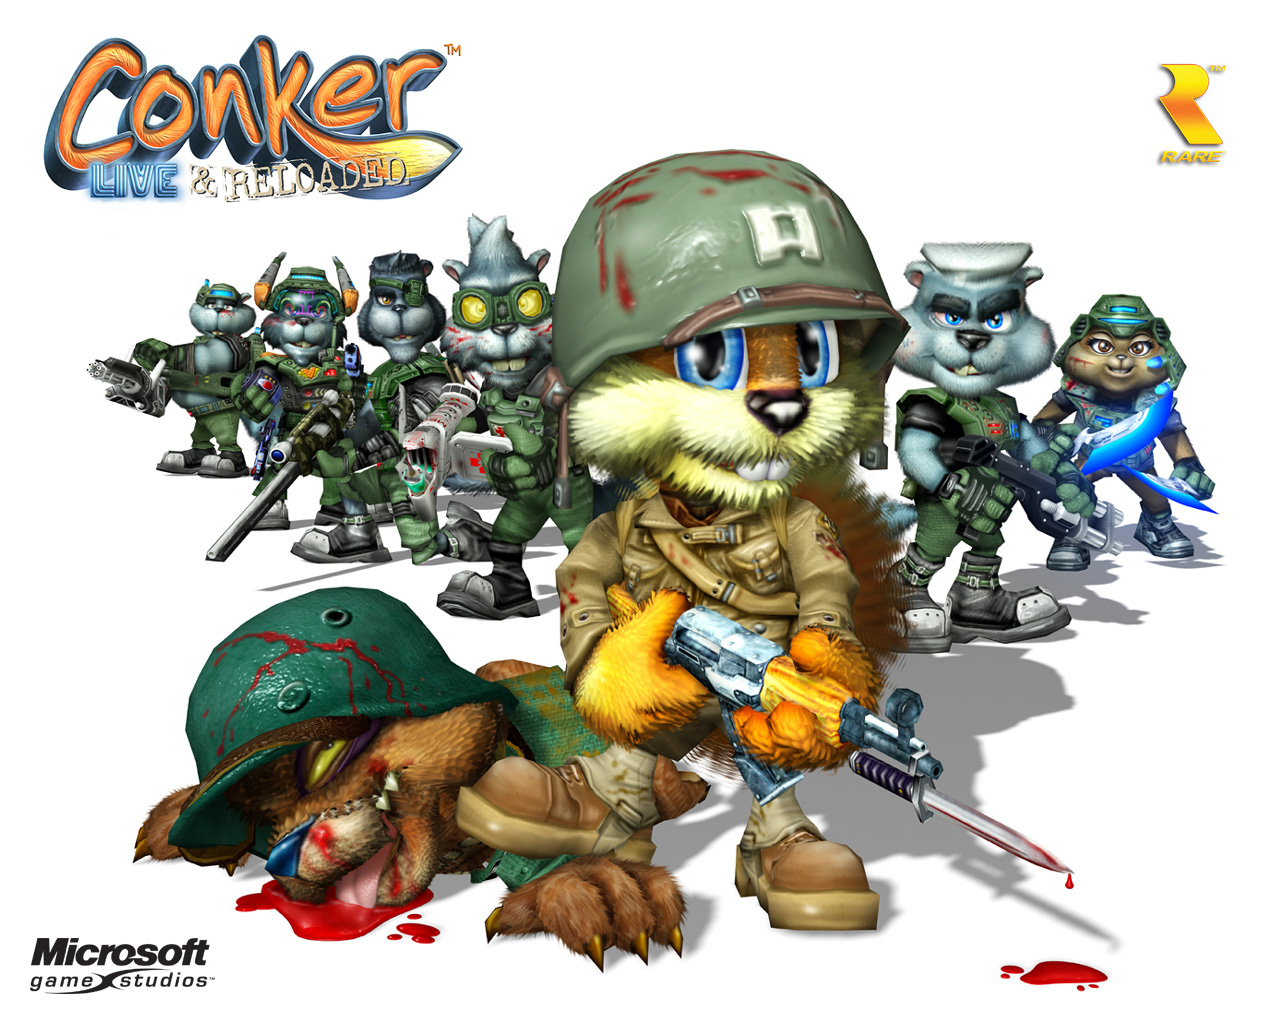 Conker Live and Reloaded Images on Fanpop.